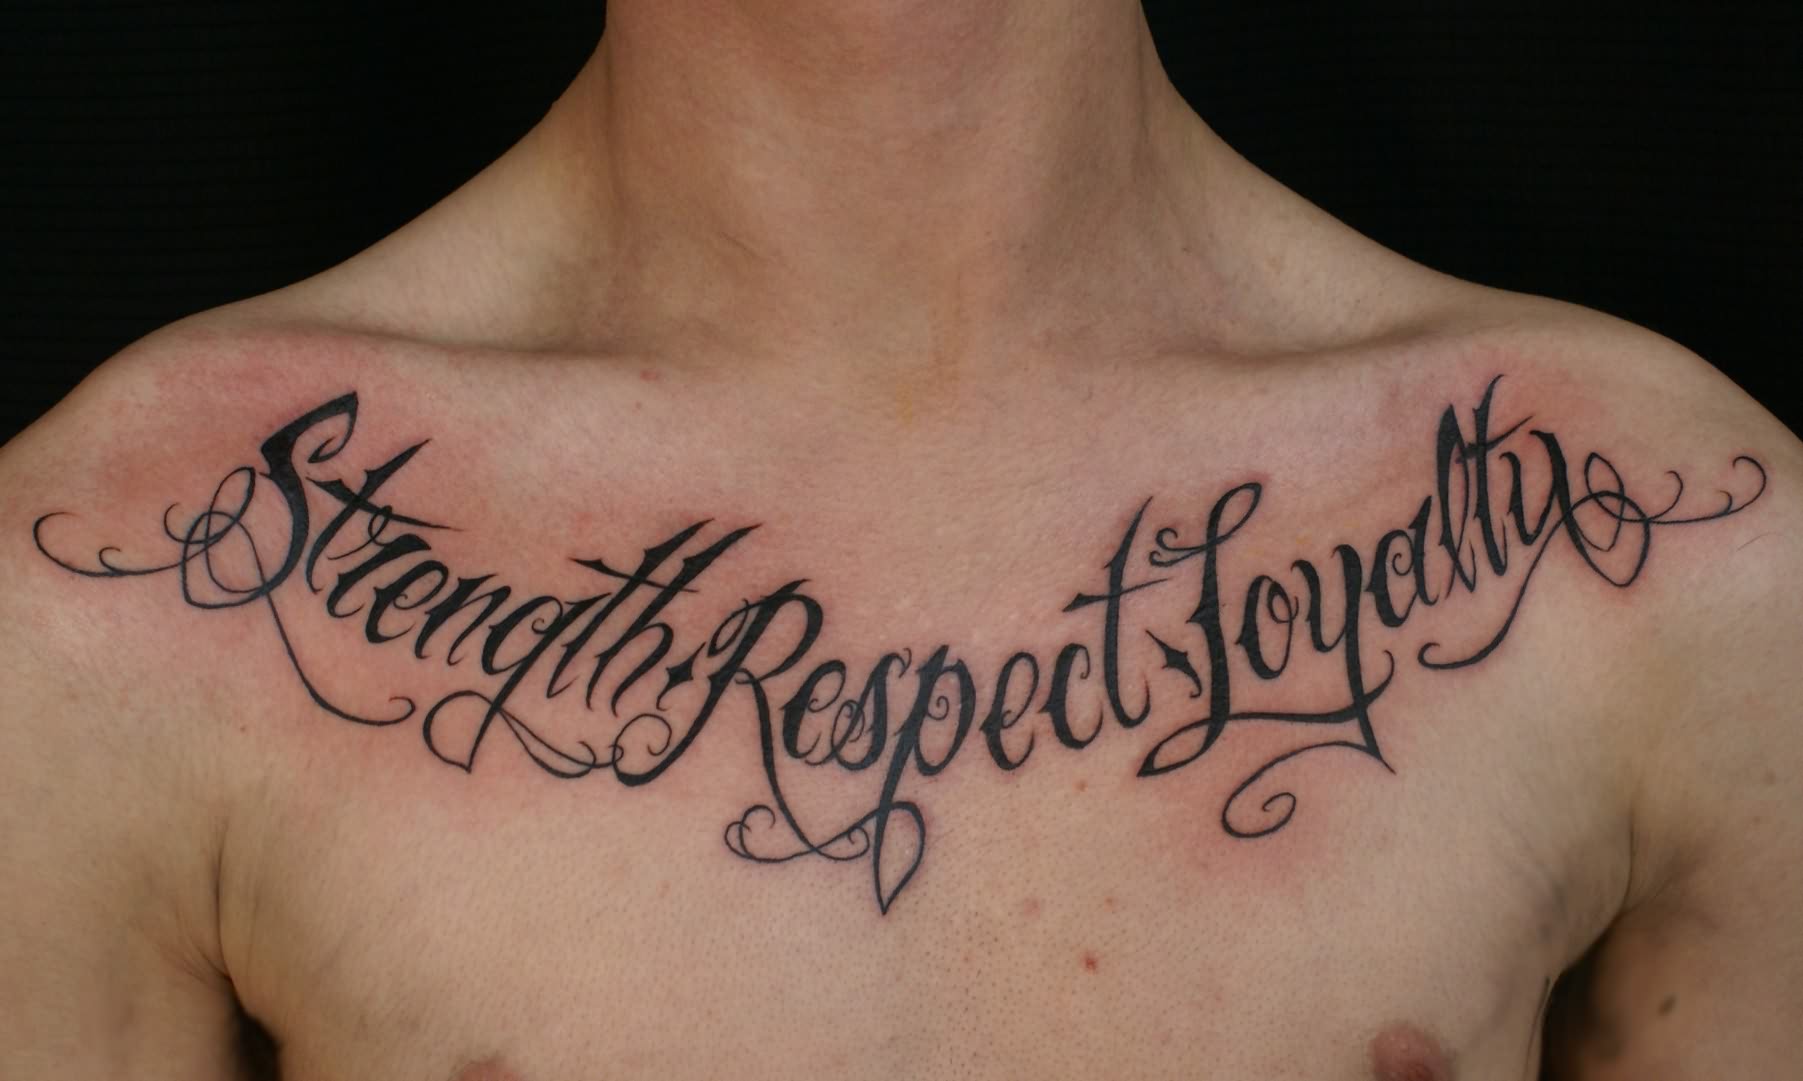 6. "Tattoo Quotes on Chest" - wide 3